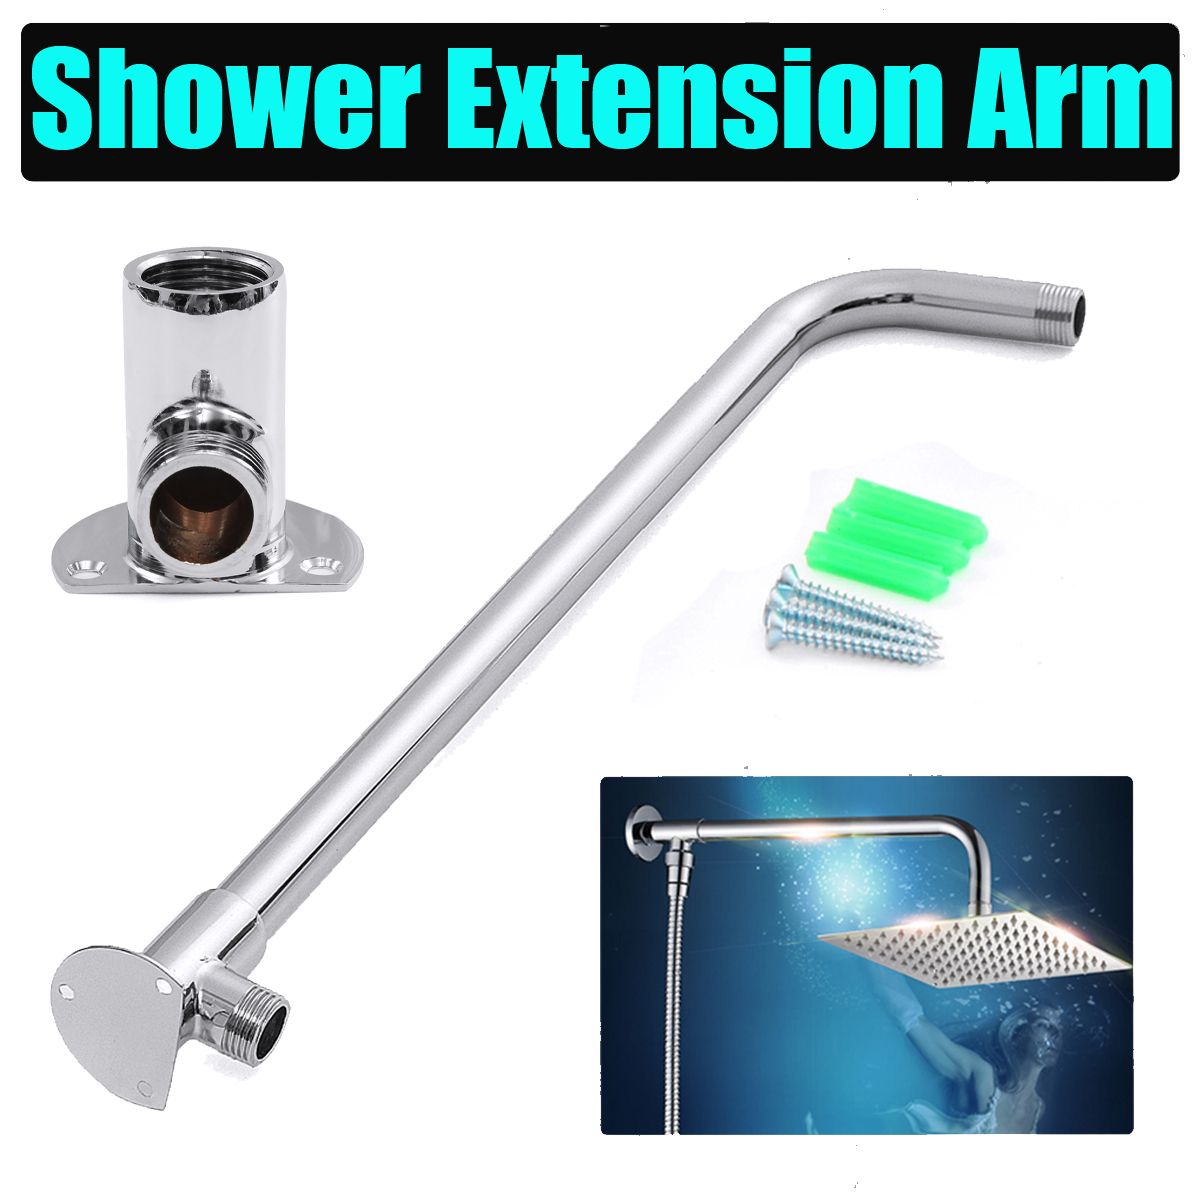 475mm-Long-Shower-Arm-Bottom-Entry-Wall-Mounted-Shower-Head-Extension-With-Copper-Base-1372276